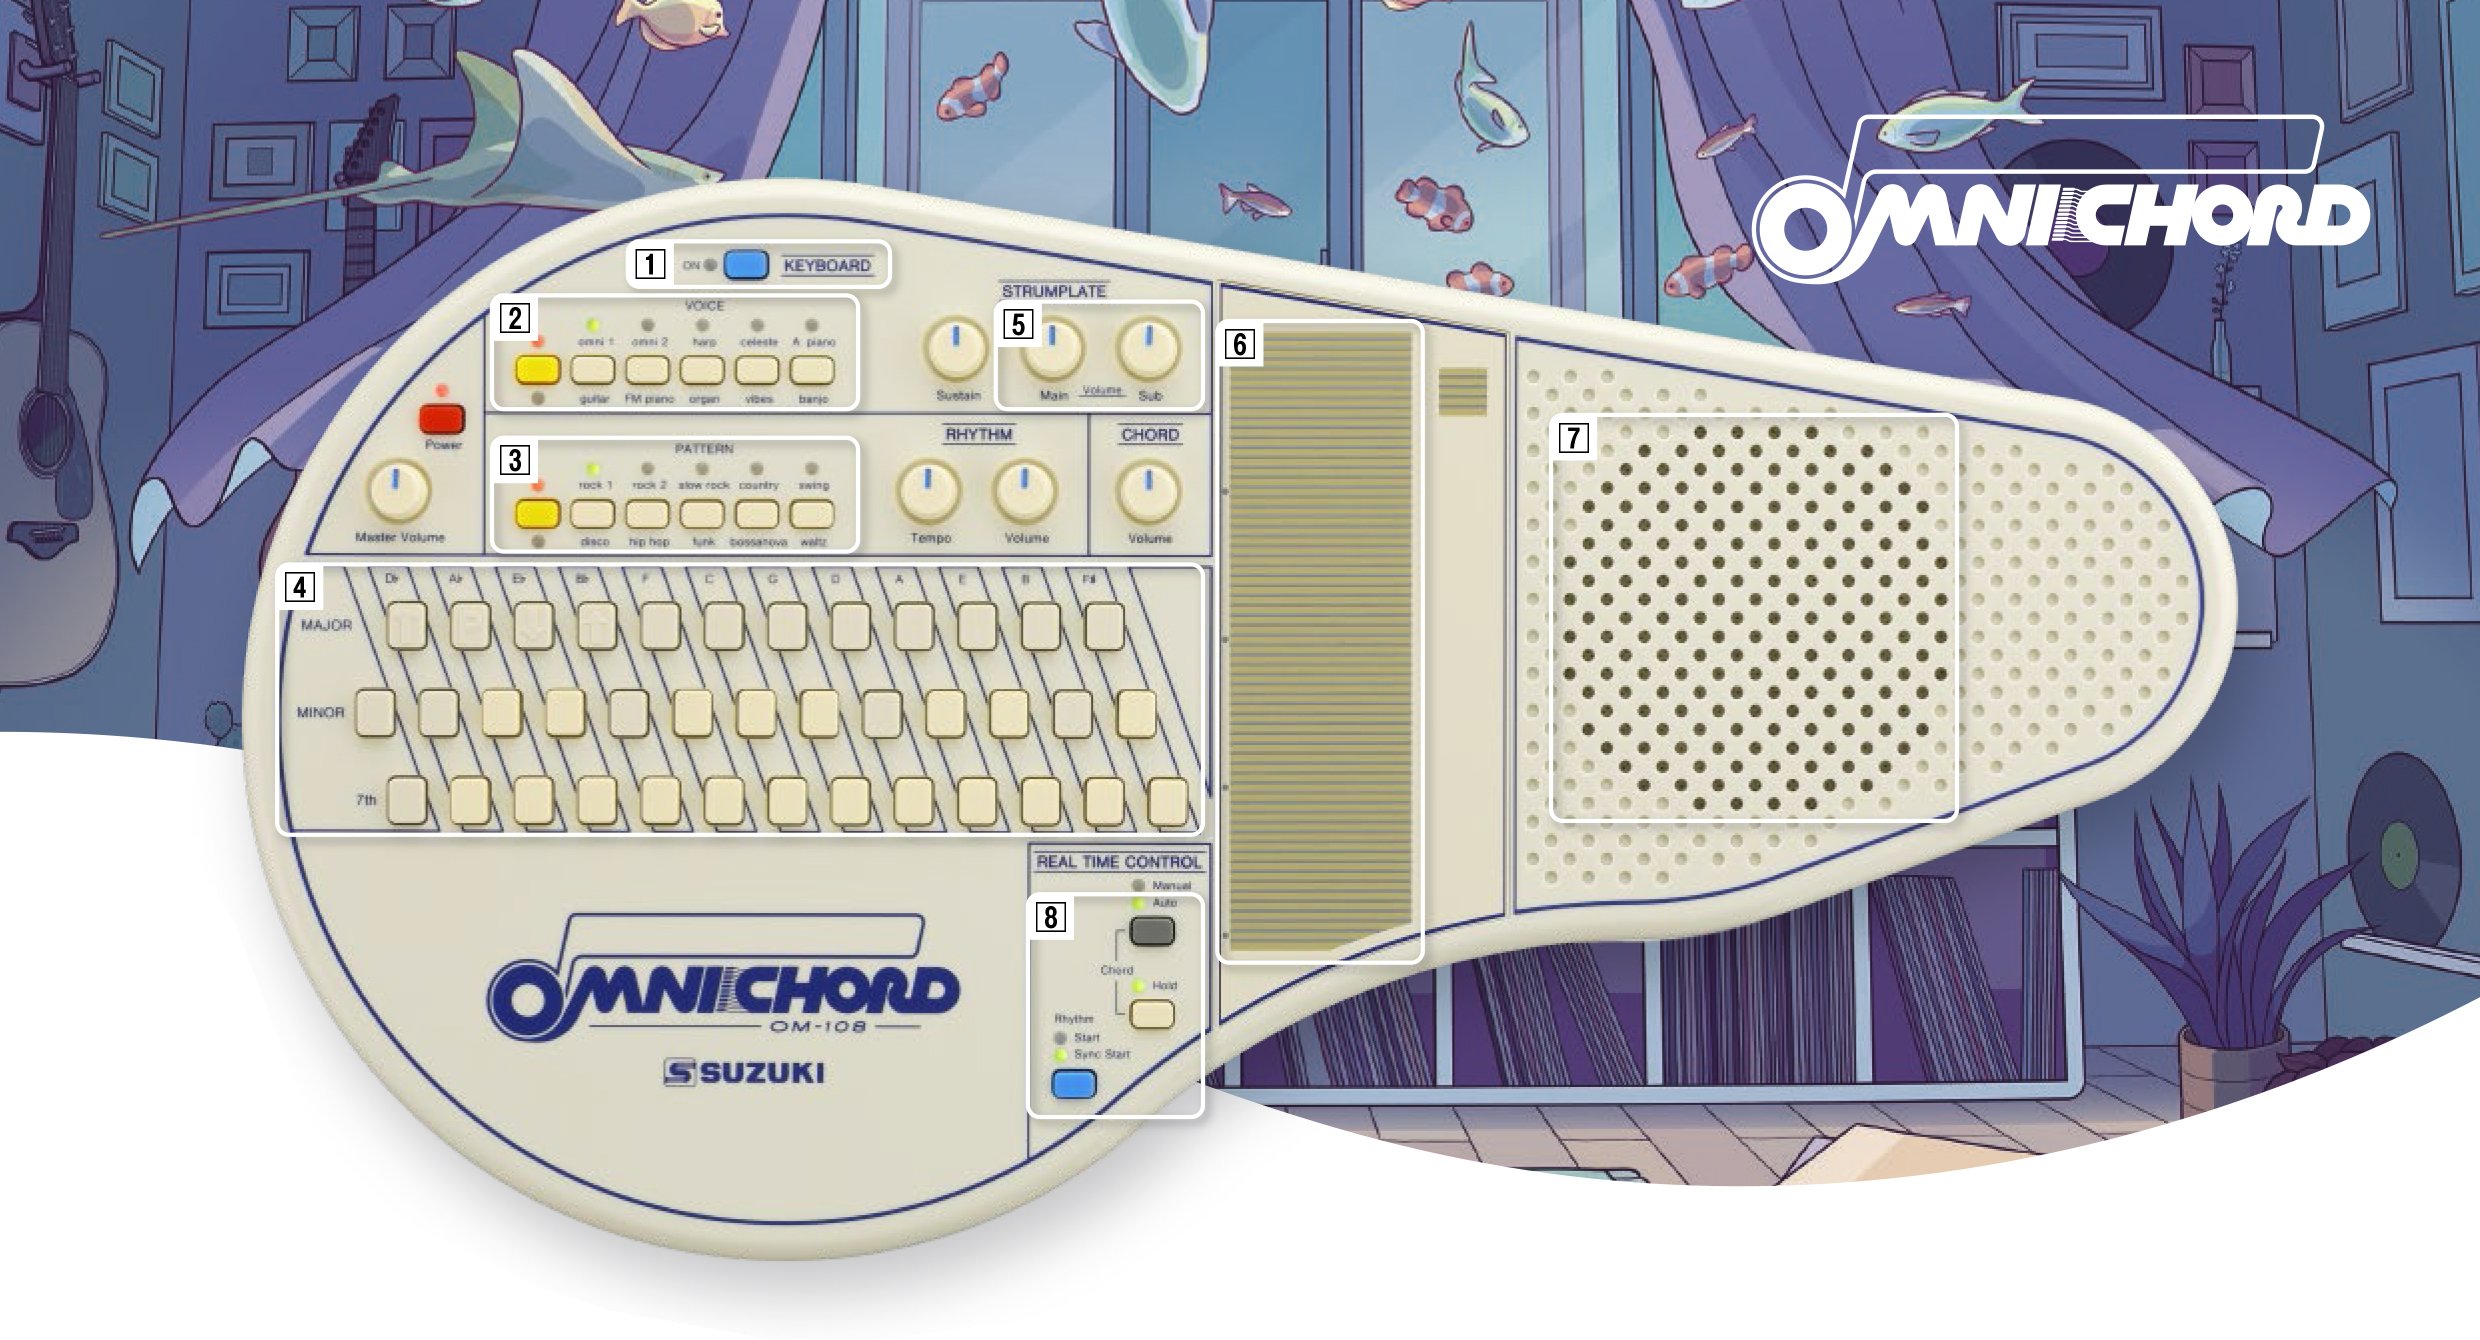 Omnichord overview